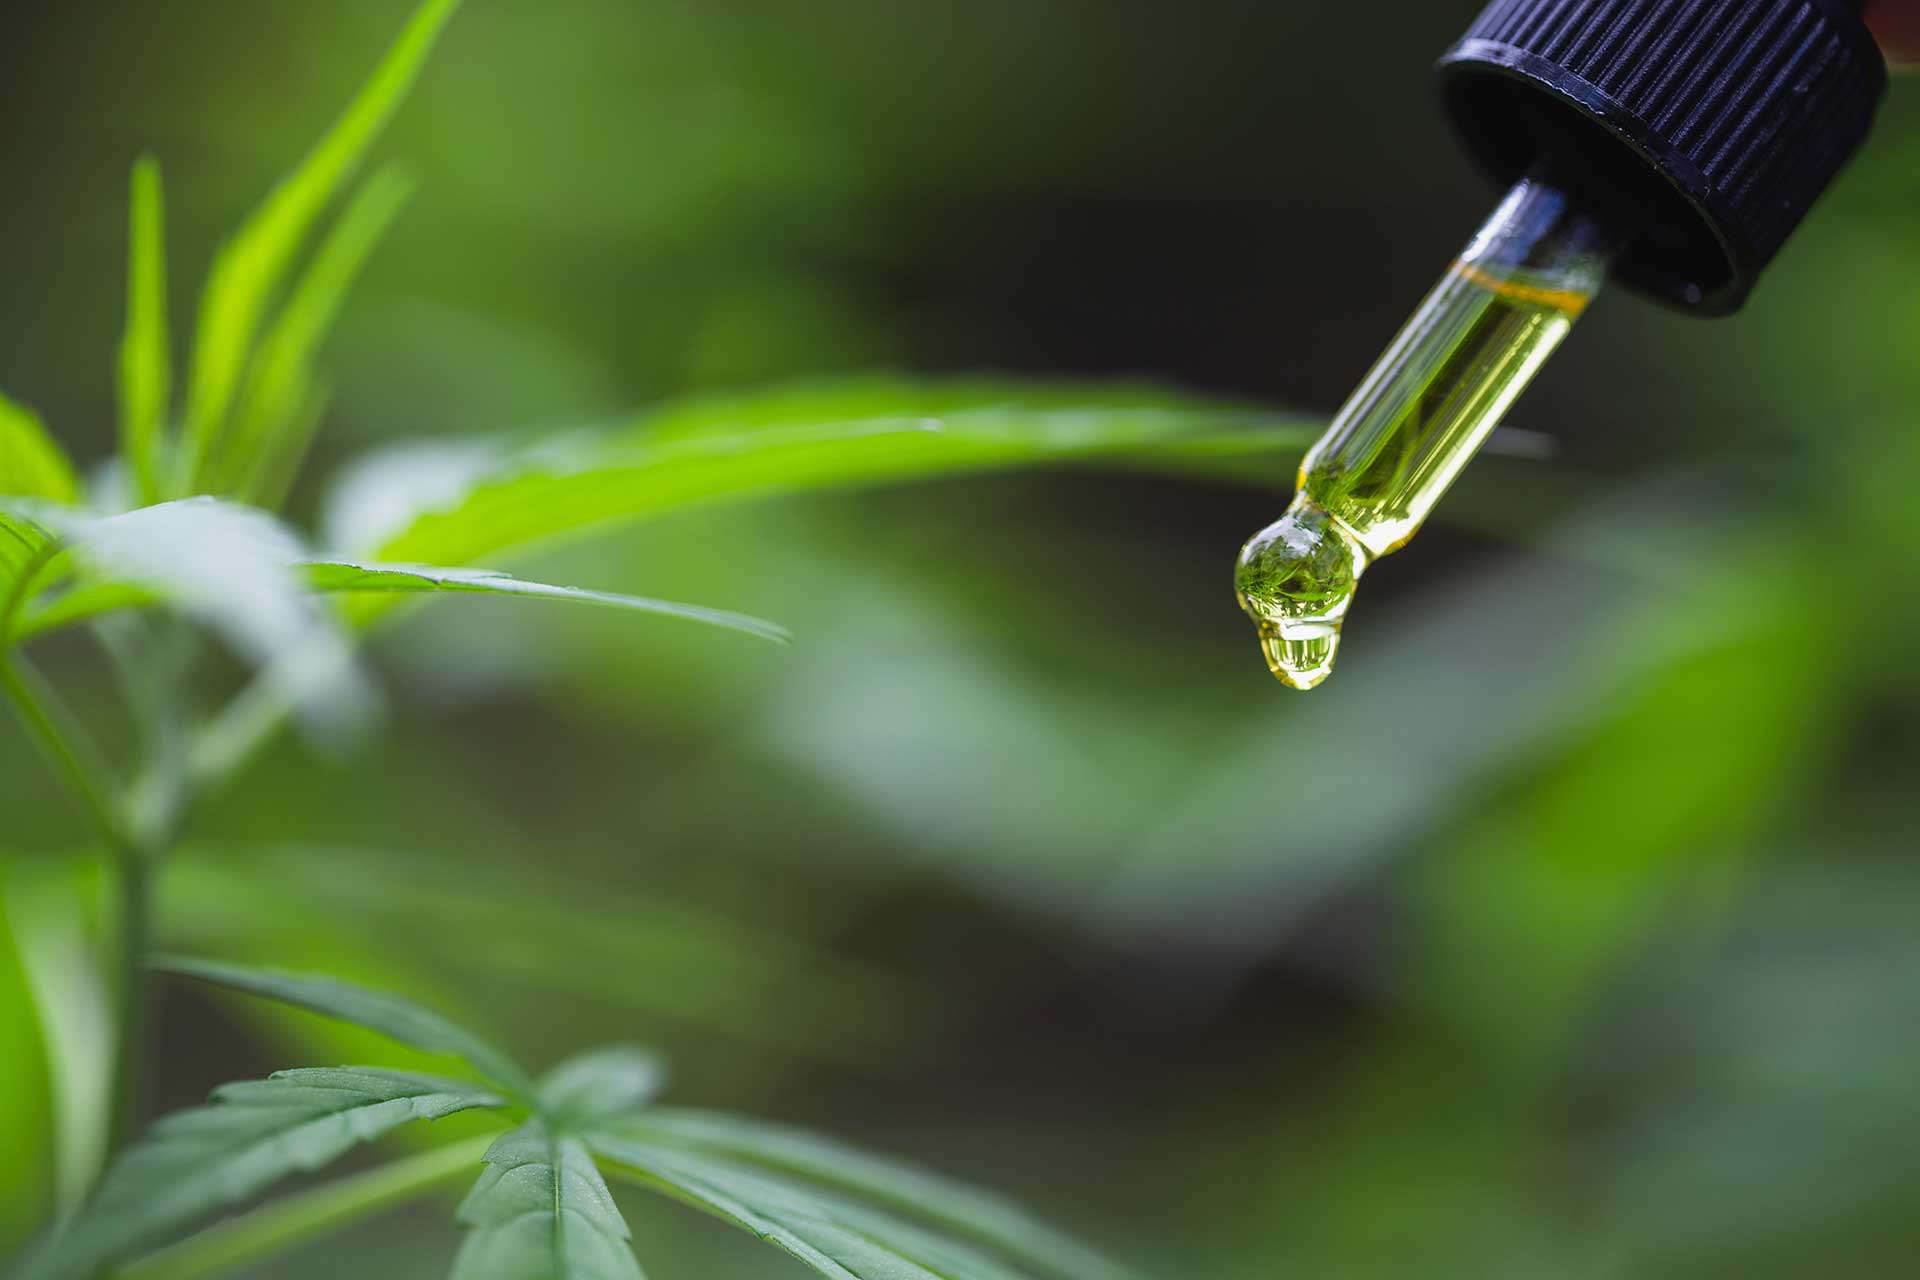 Why is Nanoemulsion the Latest Craze in CBD Products? And Why Should You Care?